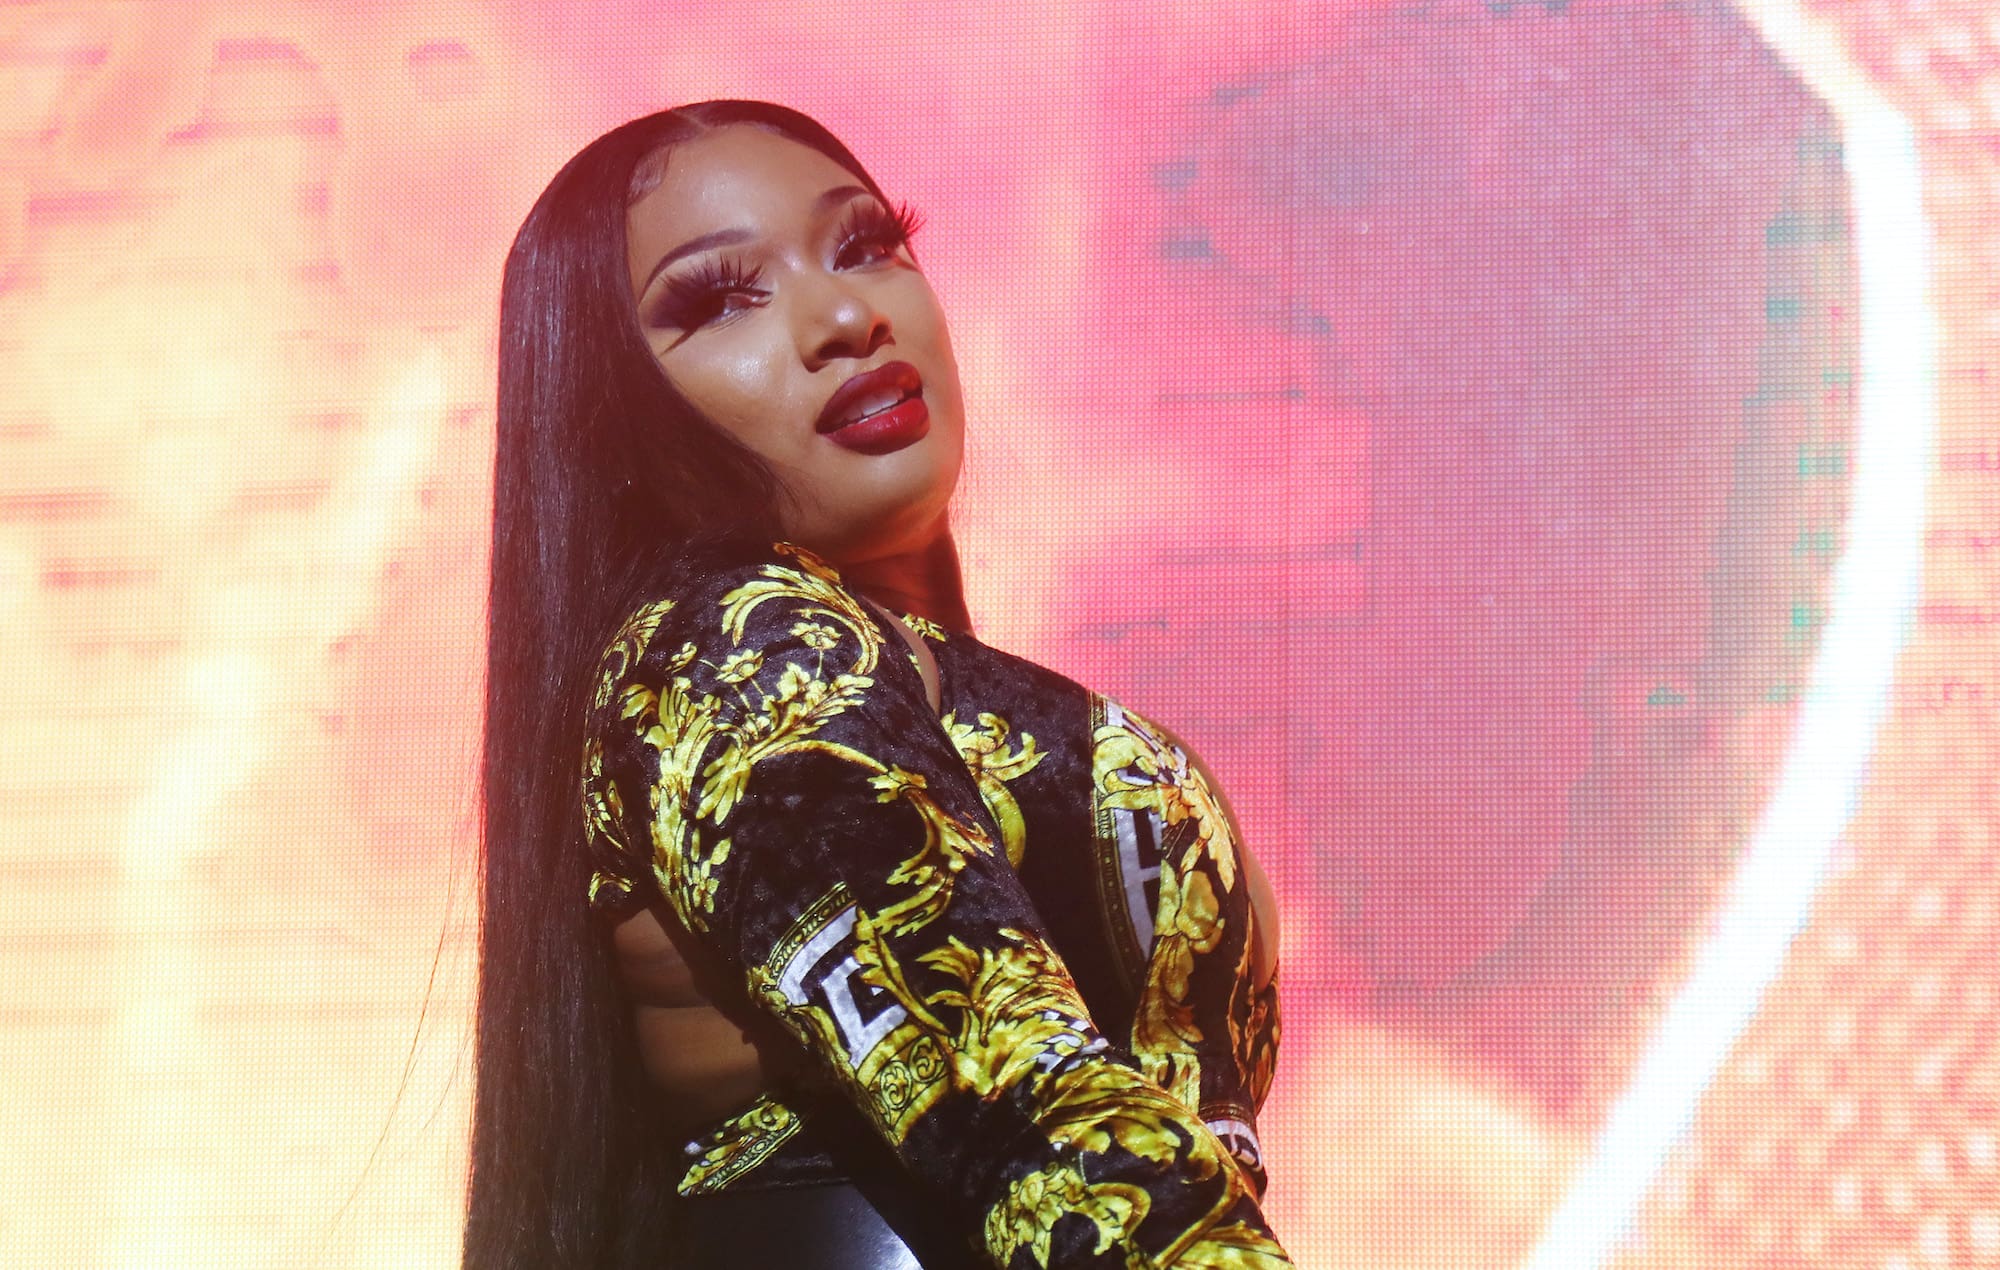 Megan Thee Stallion Flaunts Her Natural Beauty And Impresses Fans With A Grand Gesture